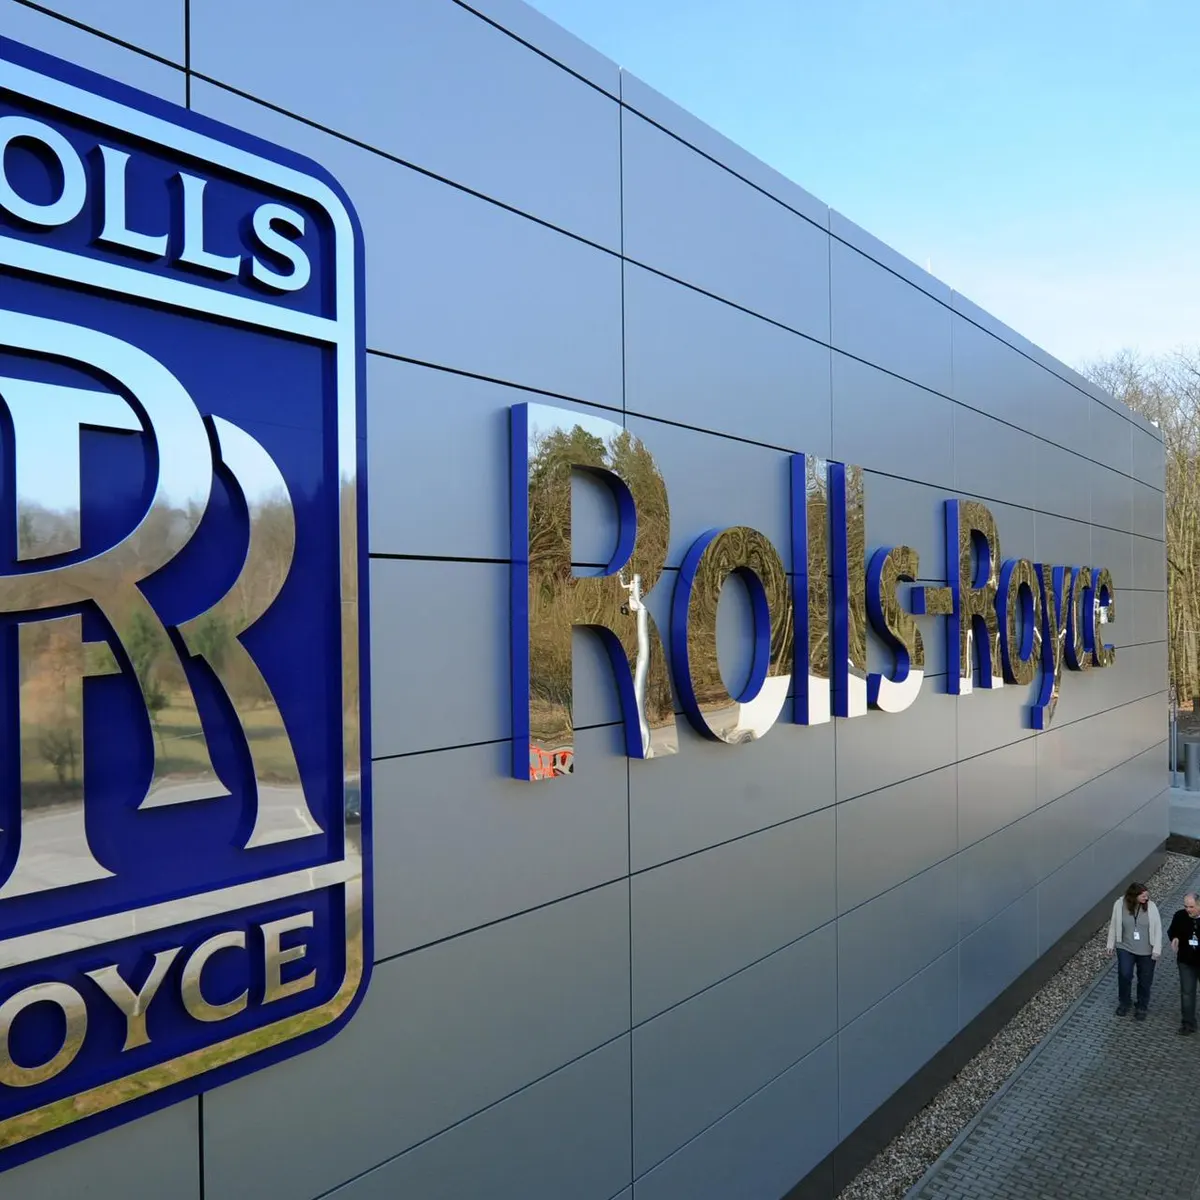 rolls-royce-to-cut-thousands-of-jobs-in-turnaround-plan